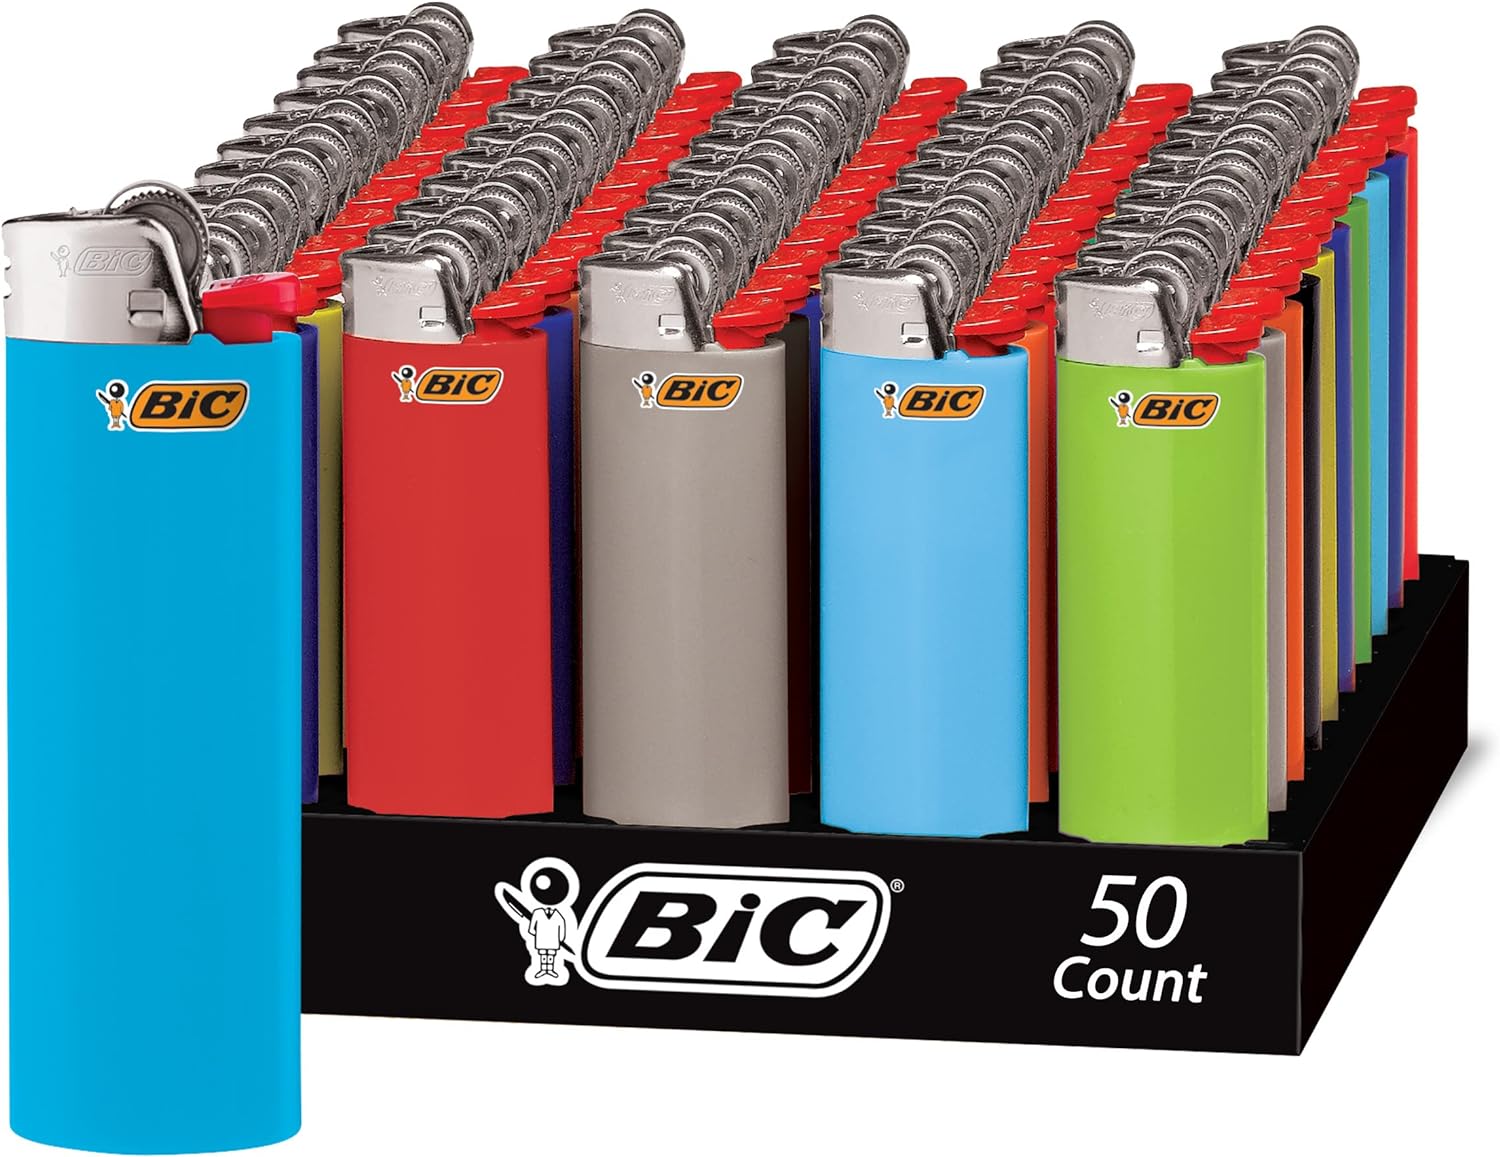 Worth buying the brick so you have lighters for at least 12 mo. $3  at a gas station each.